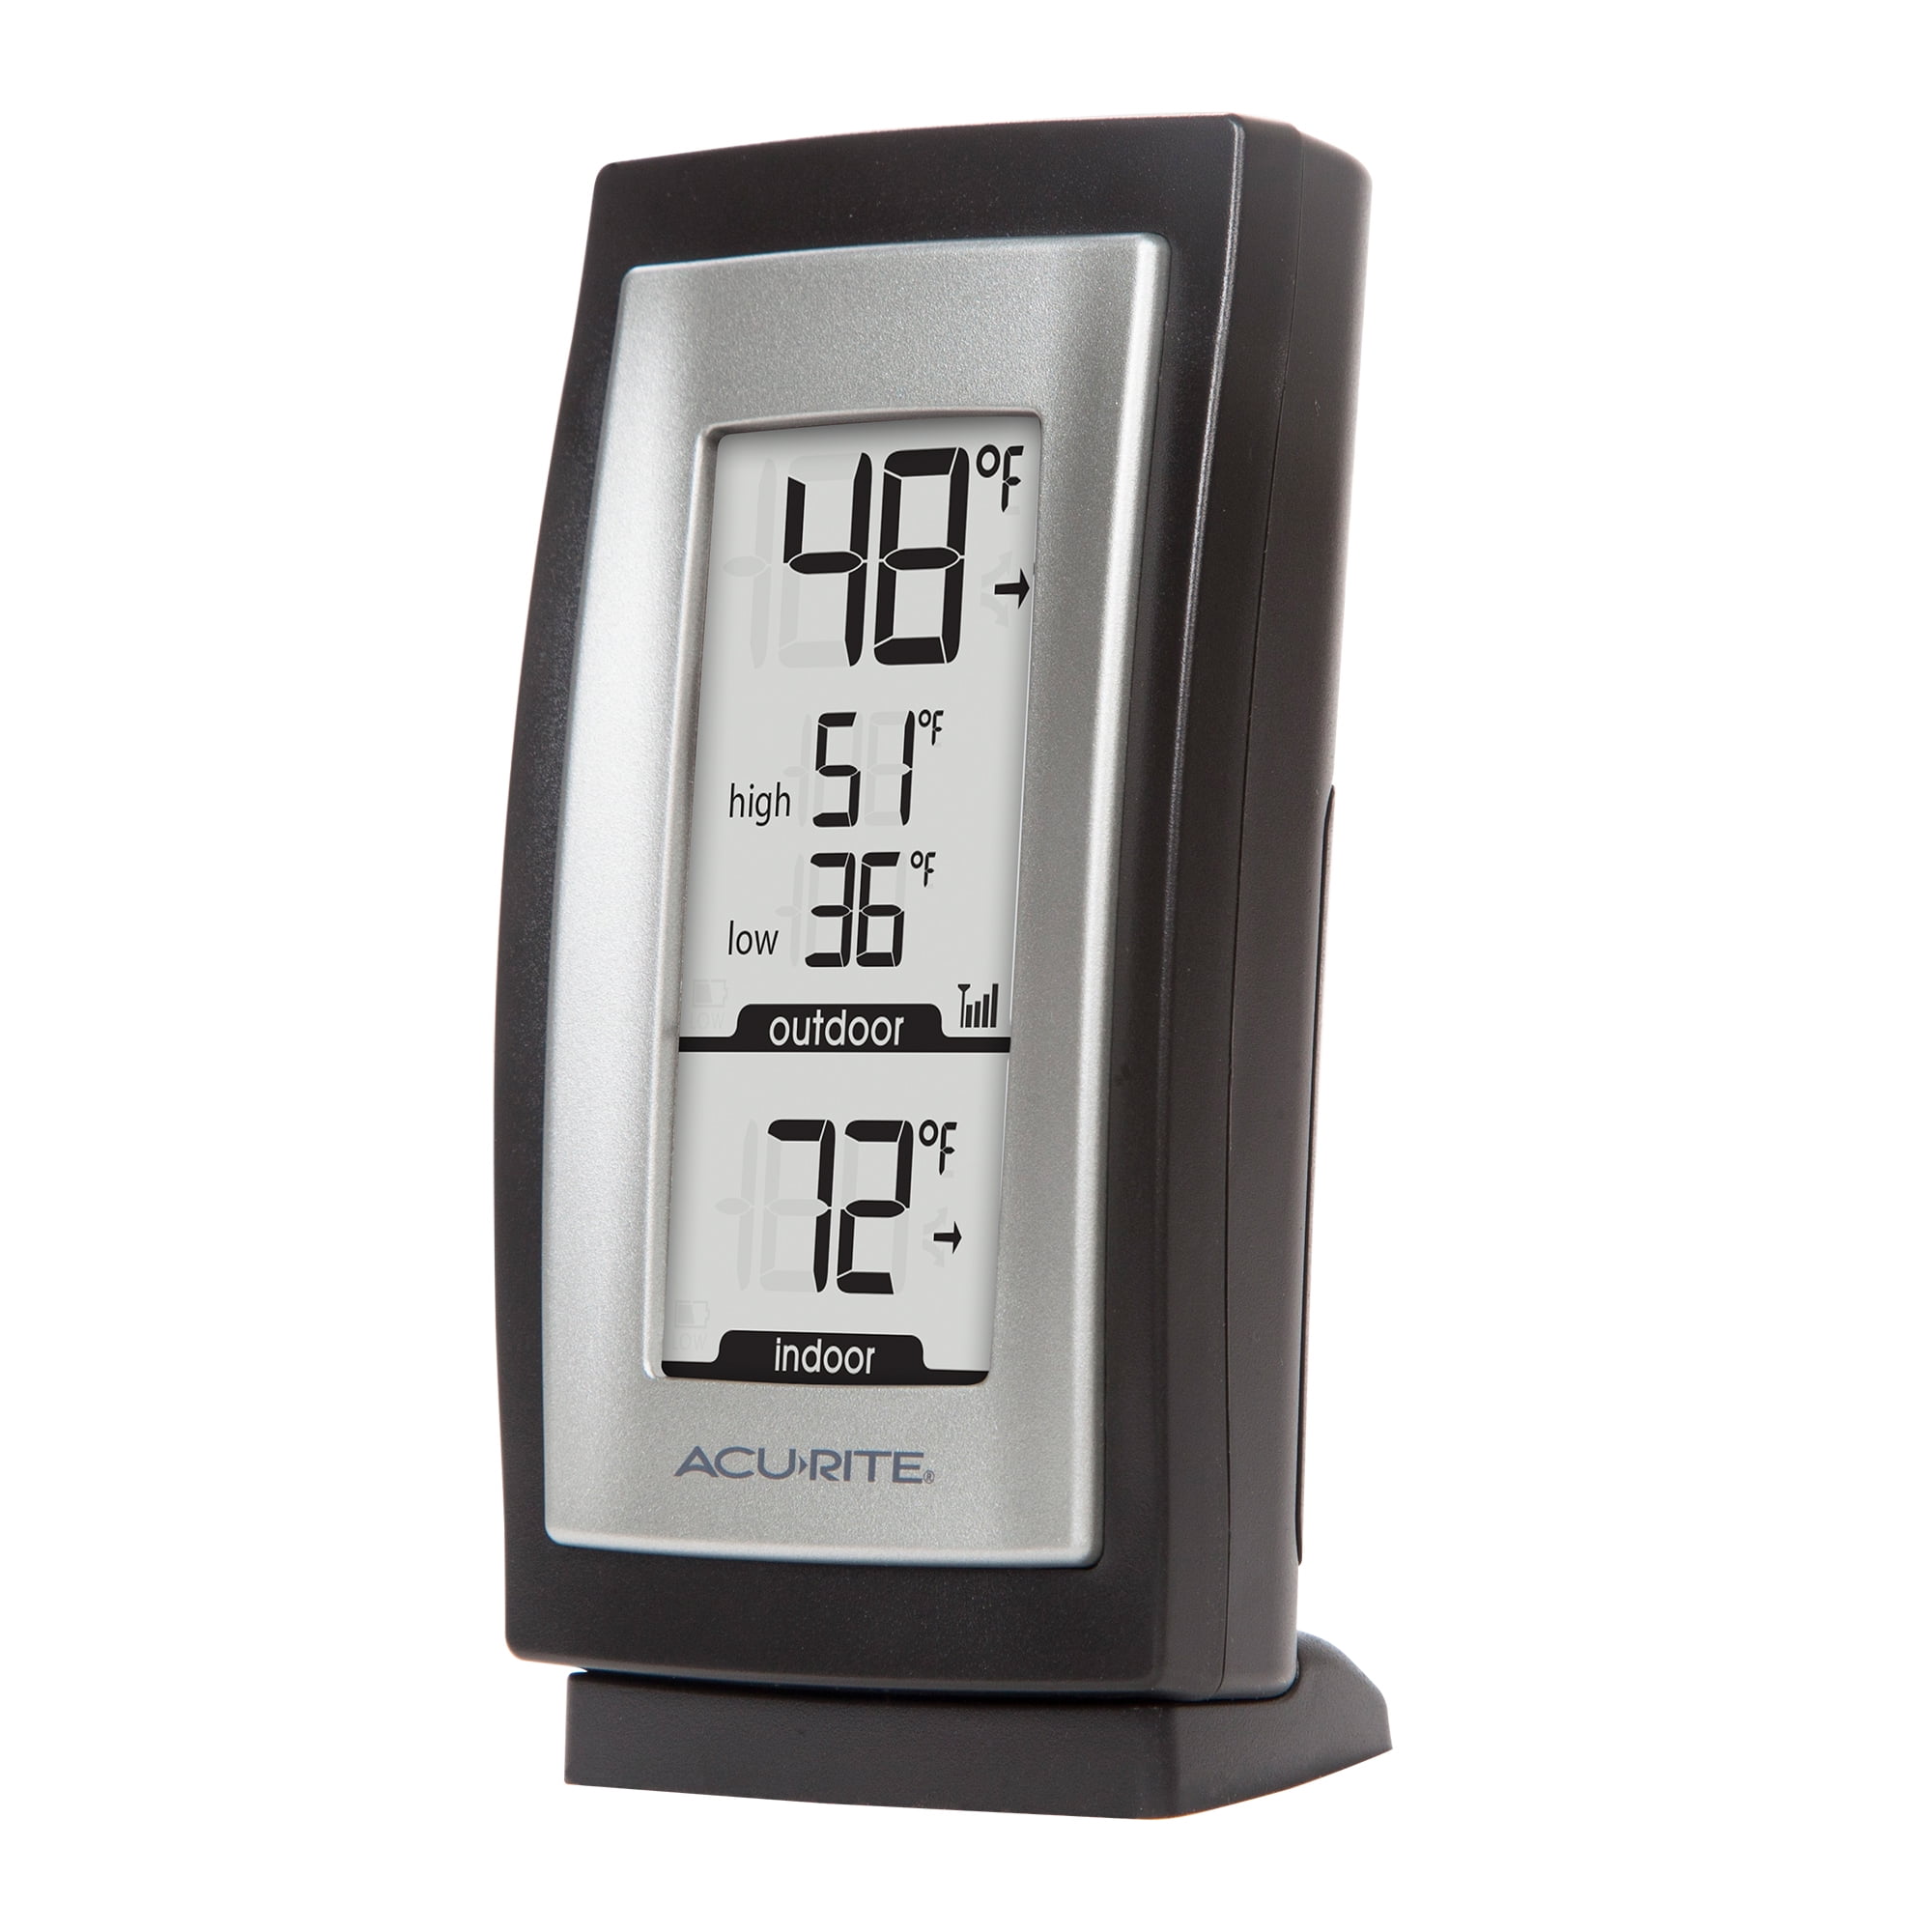 Acurite indoor outdoor Thermometer wall hanging thermometer tempature check